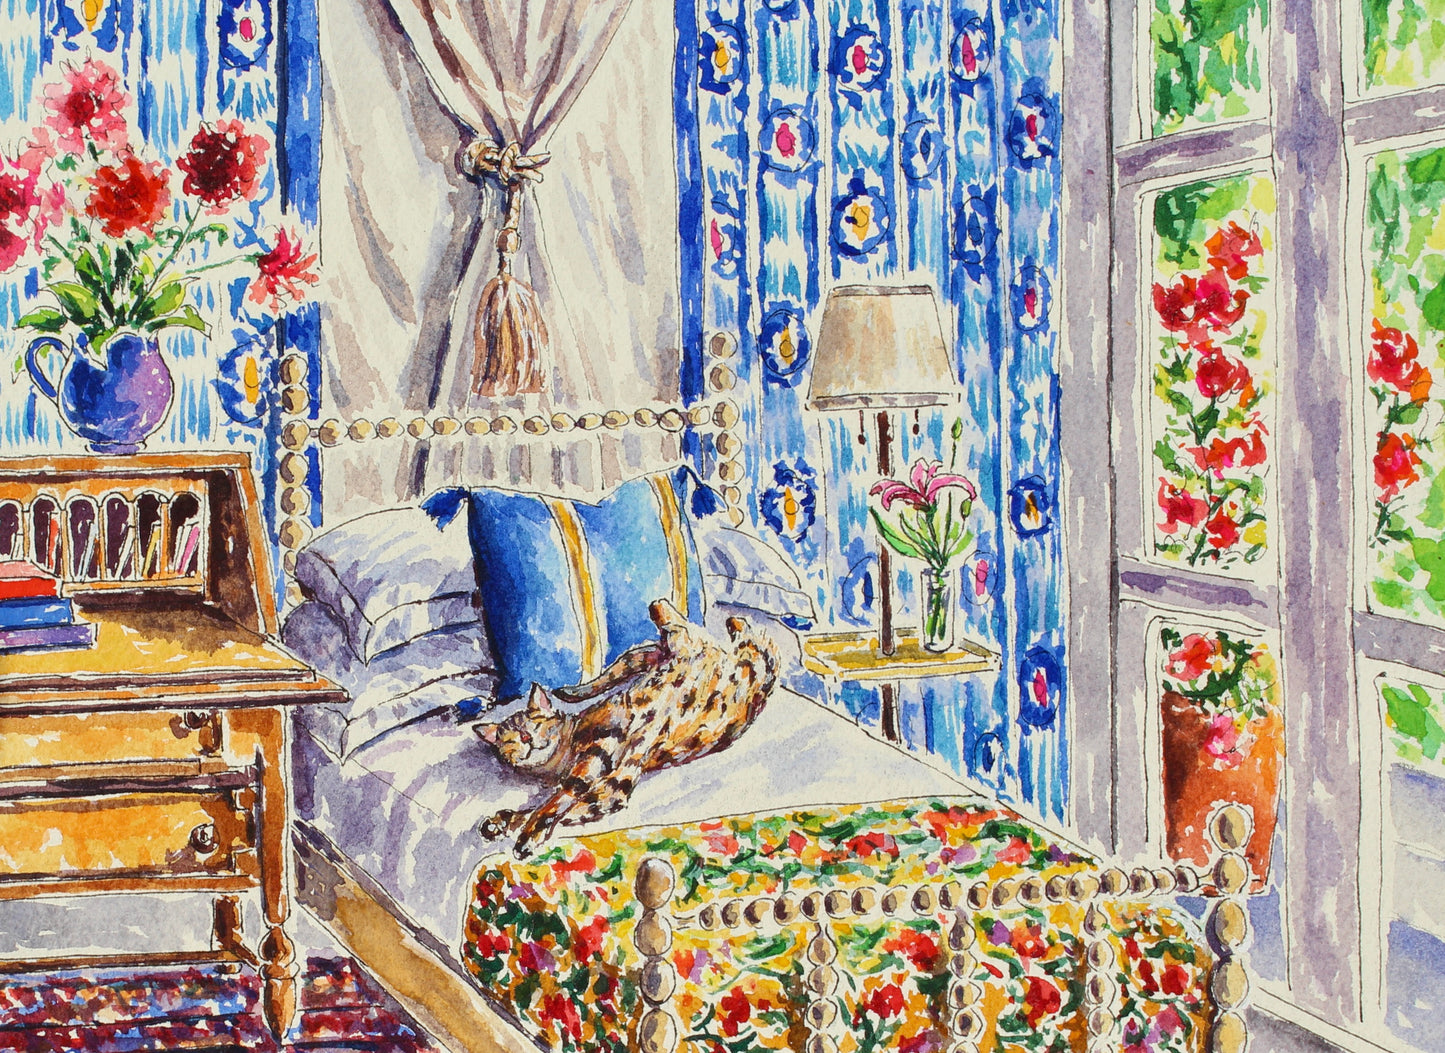 What's Blue Pussycat?, An Original 14" x 10" Watercolor And Ink Painting Of A Maximalist Designed Room With A Bengal Cat